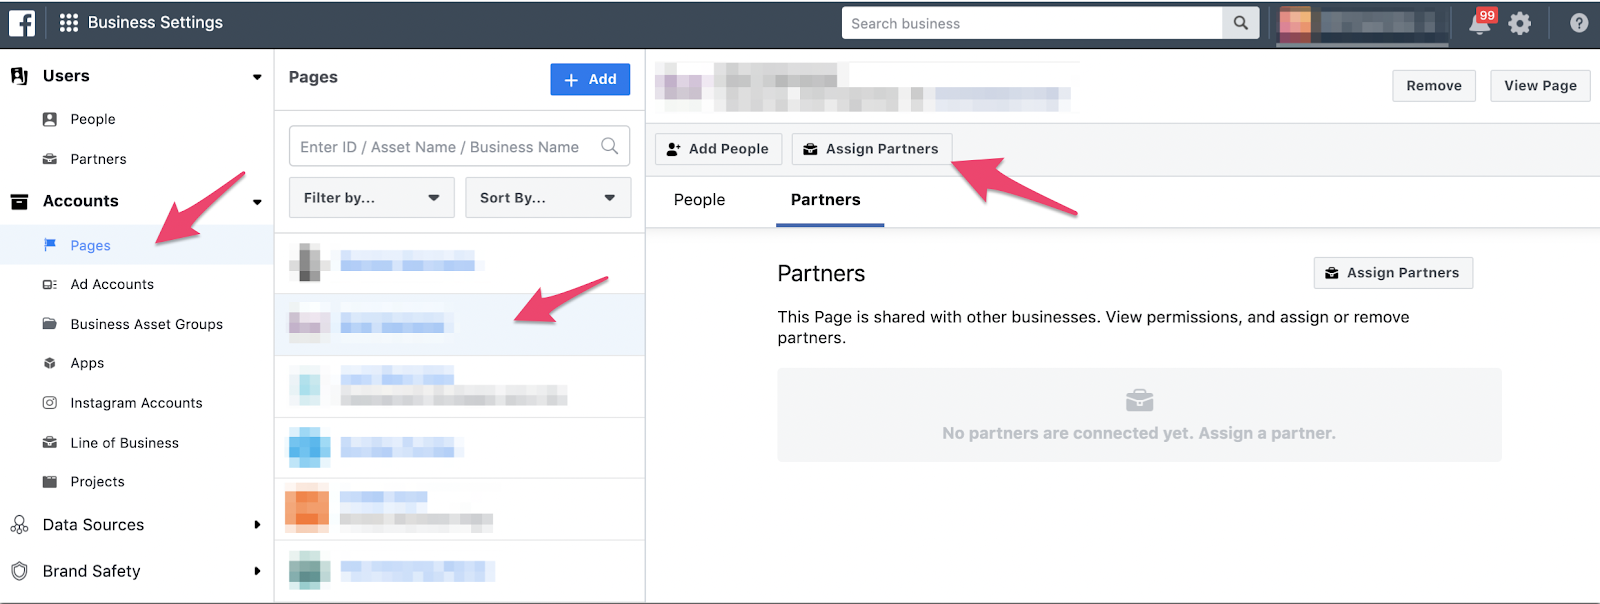 Screenshot of Pages' options on Facebook Ad Business Settings.